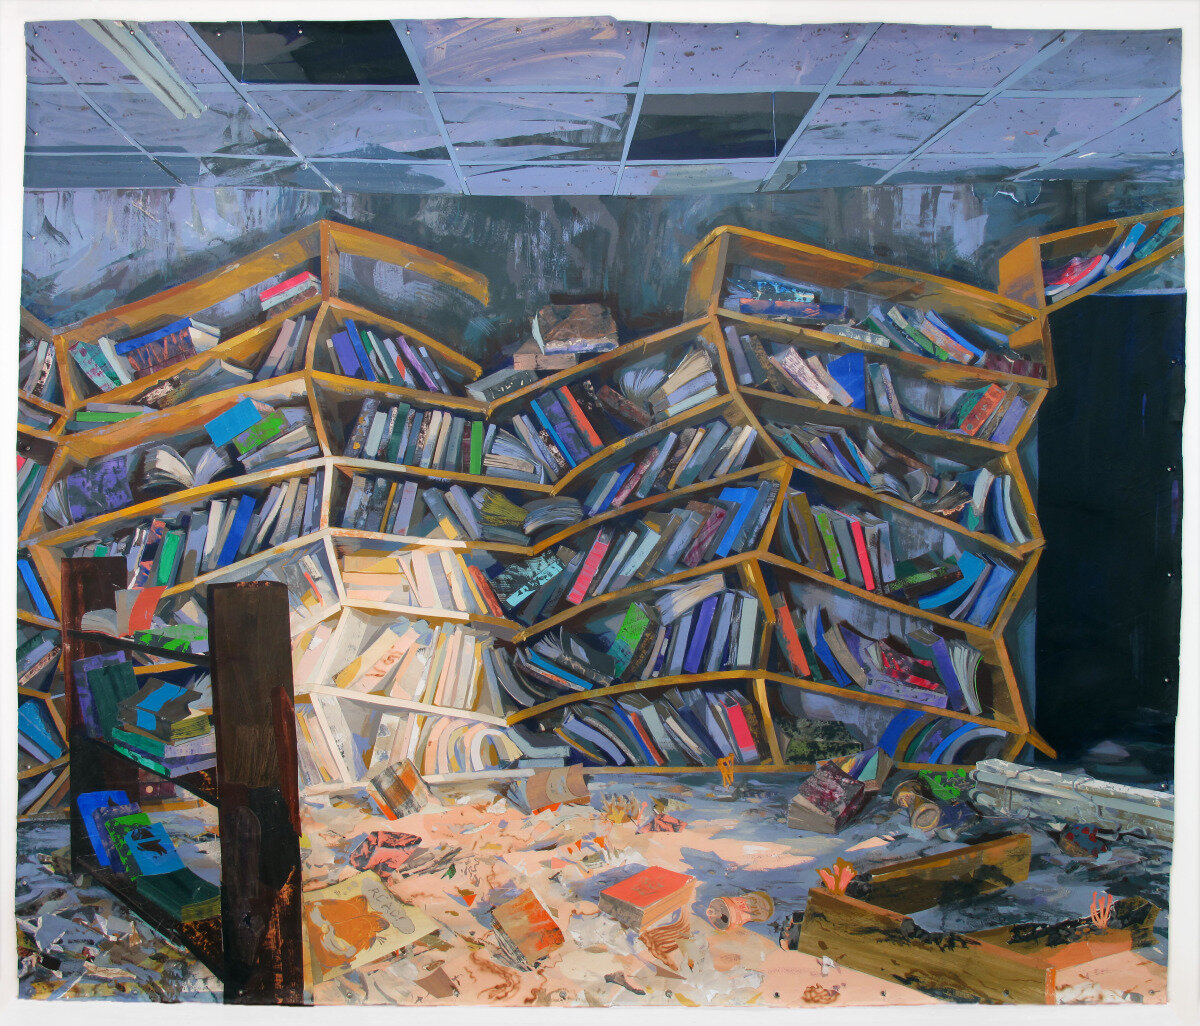  The Reading Room, 2014, Flashe, acrylic, collage on unstretched canvas, 9.5 x 11.5 ft (290 x 350 cm) 